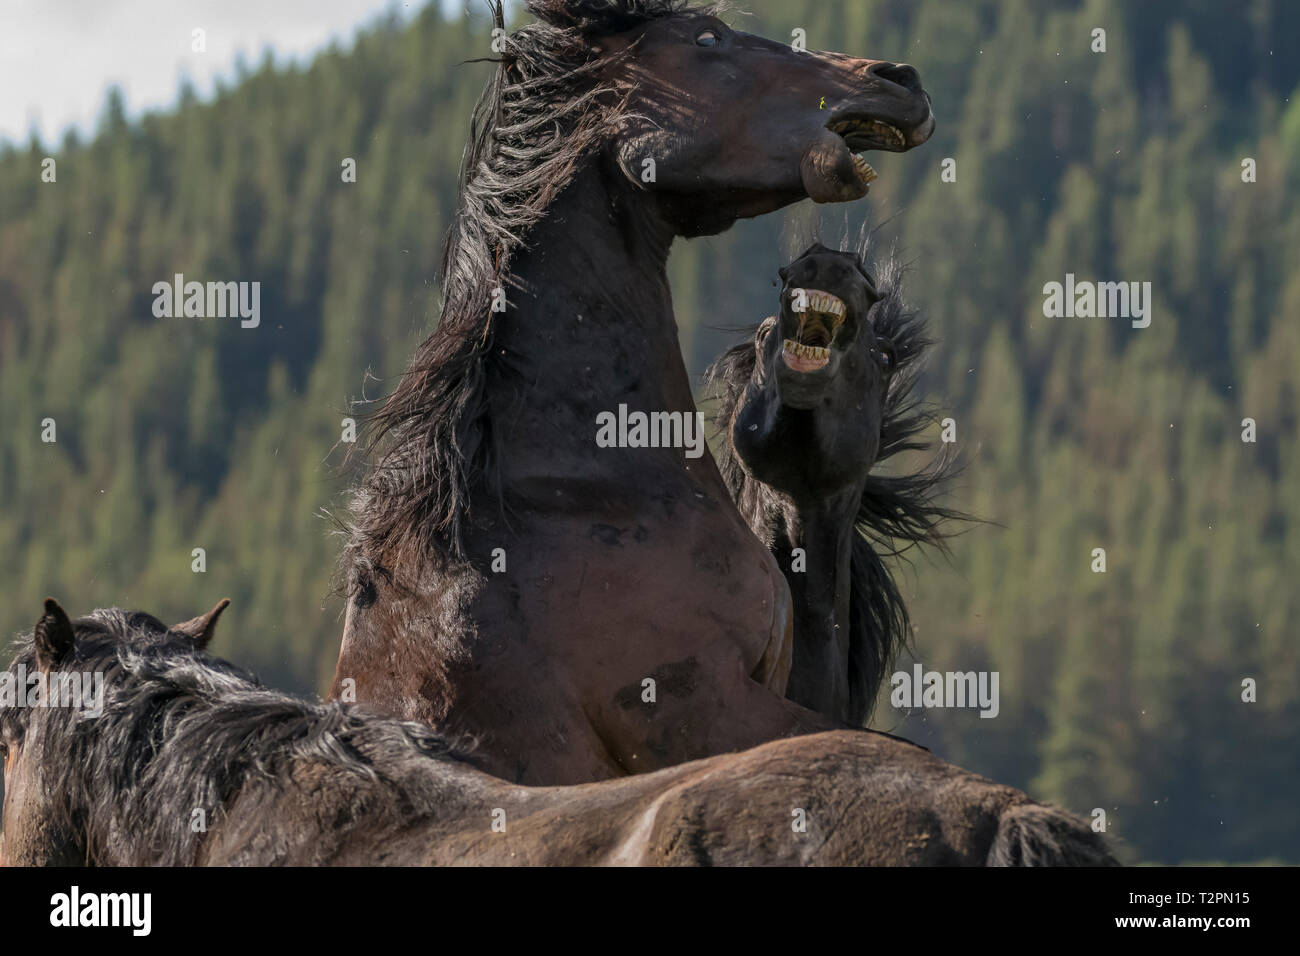 Wild/feral horses live in the Rocky Mountains of Canada in the province of Alberta.  This pair of stallions are engaged in a serious fight to determin Stock Photo